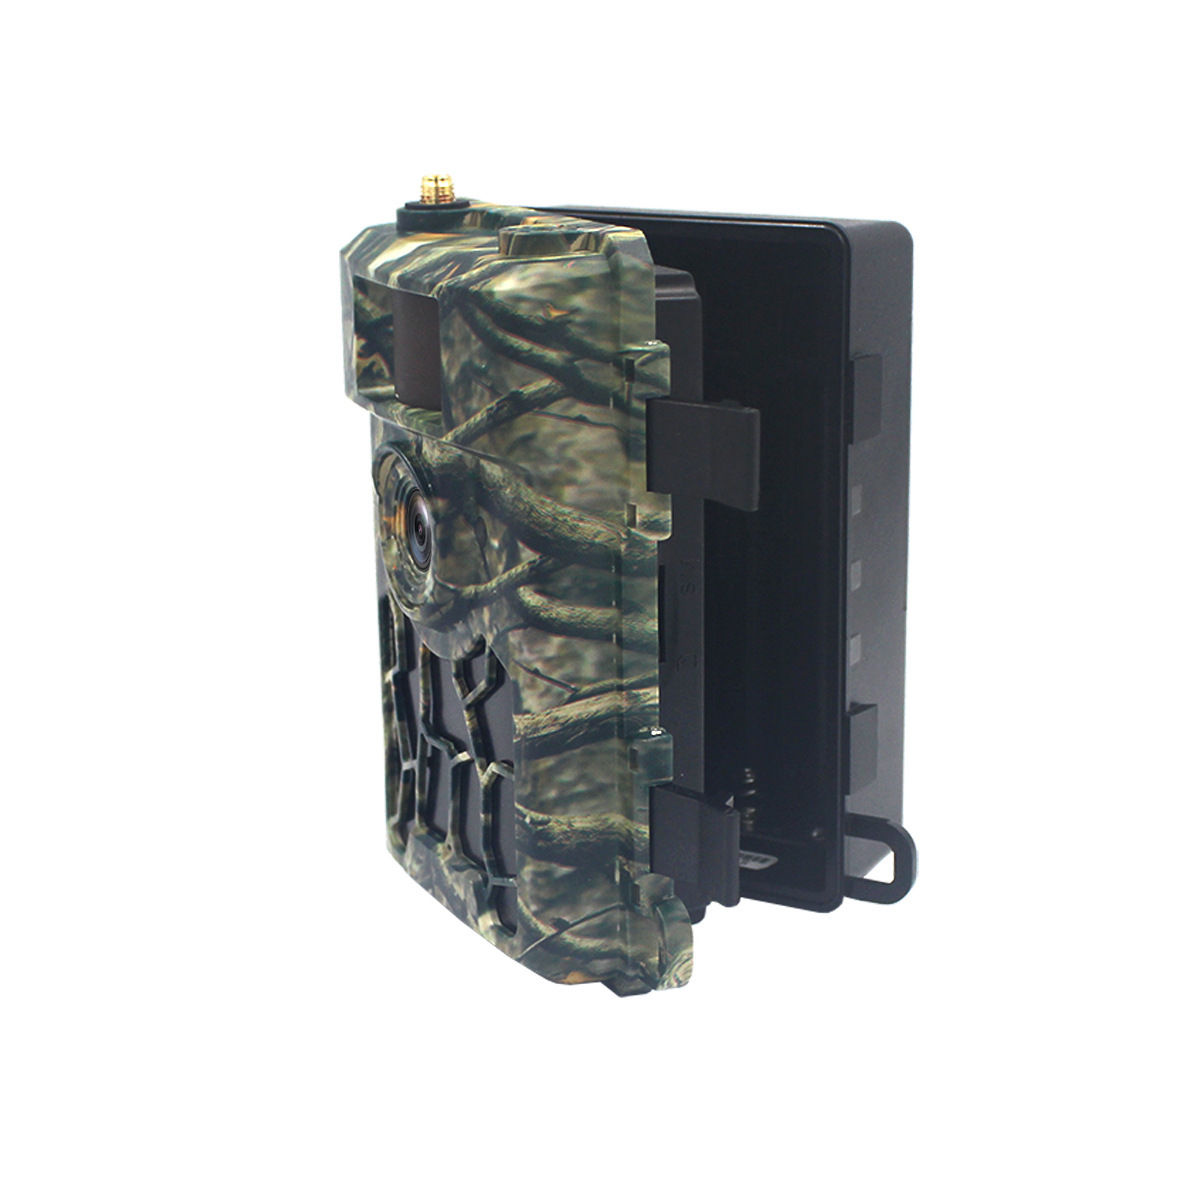 Trail Camera wifi Hunting Camera with Night Vision